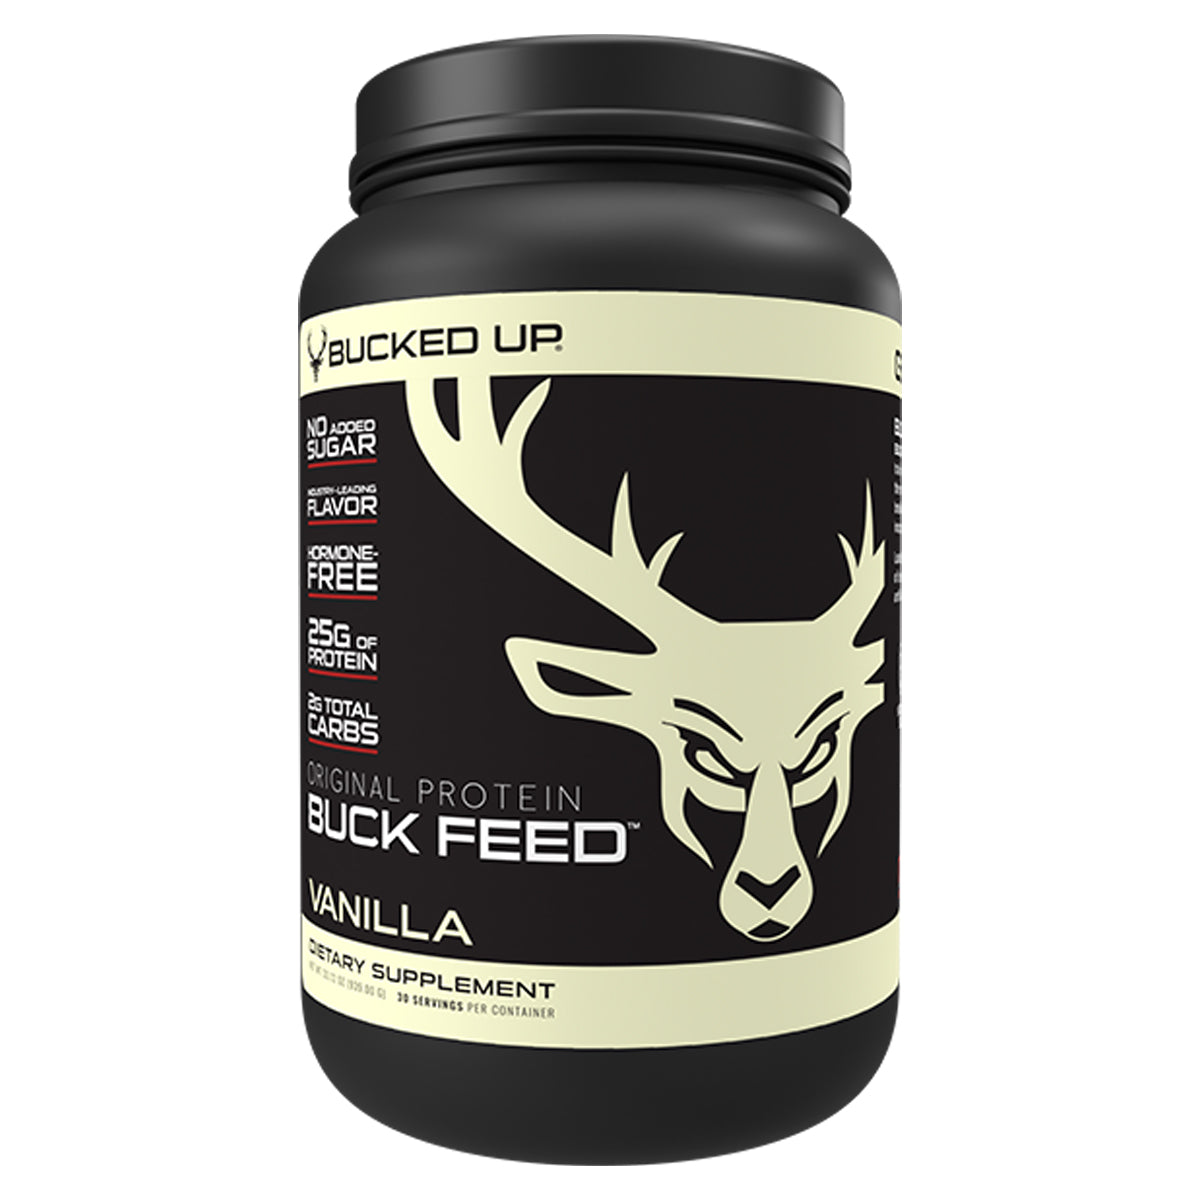 Bucked Up Buck Feed Original Protein in  by GOHUNT | Bucked Up - GOHUNT Shop